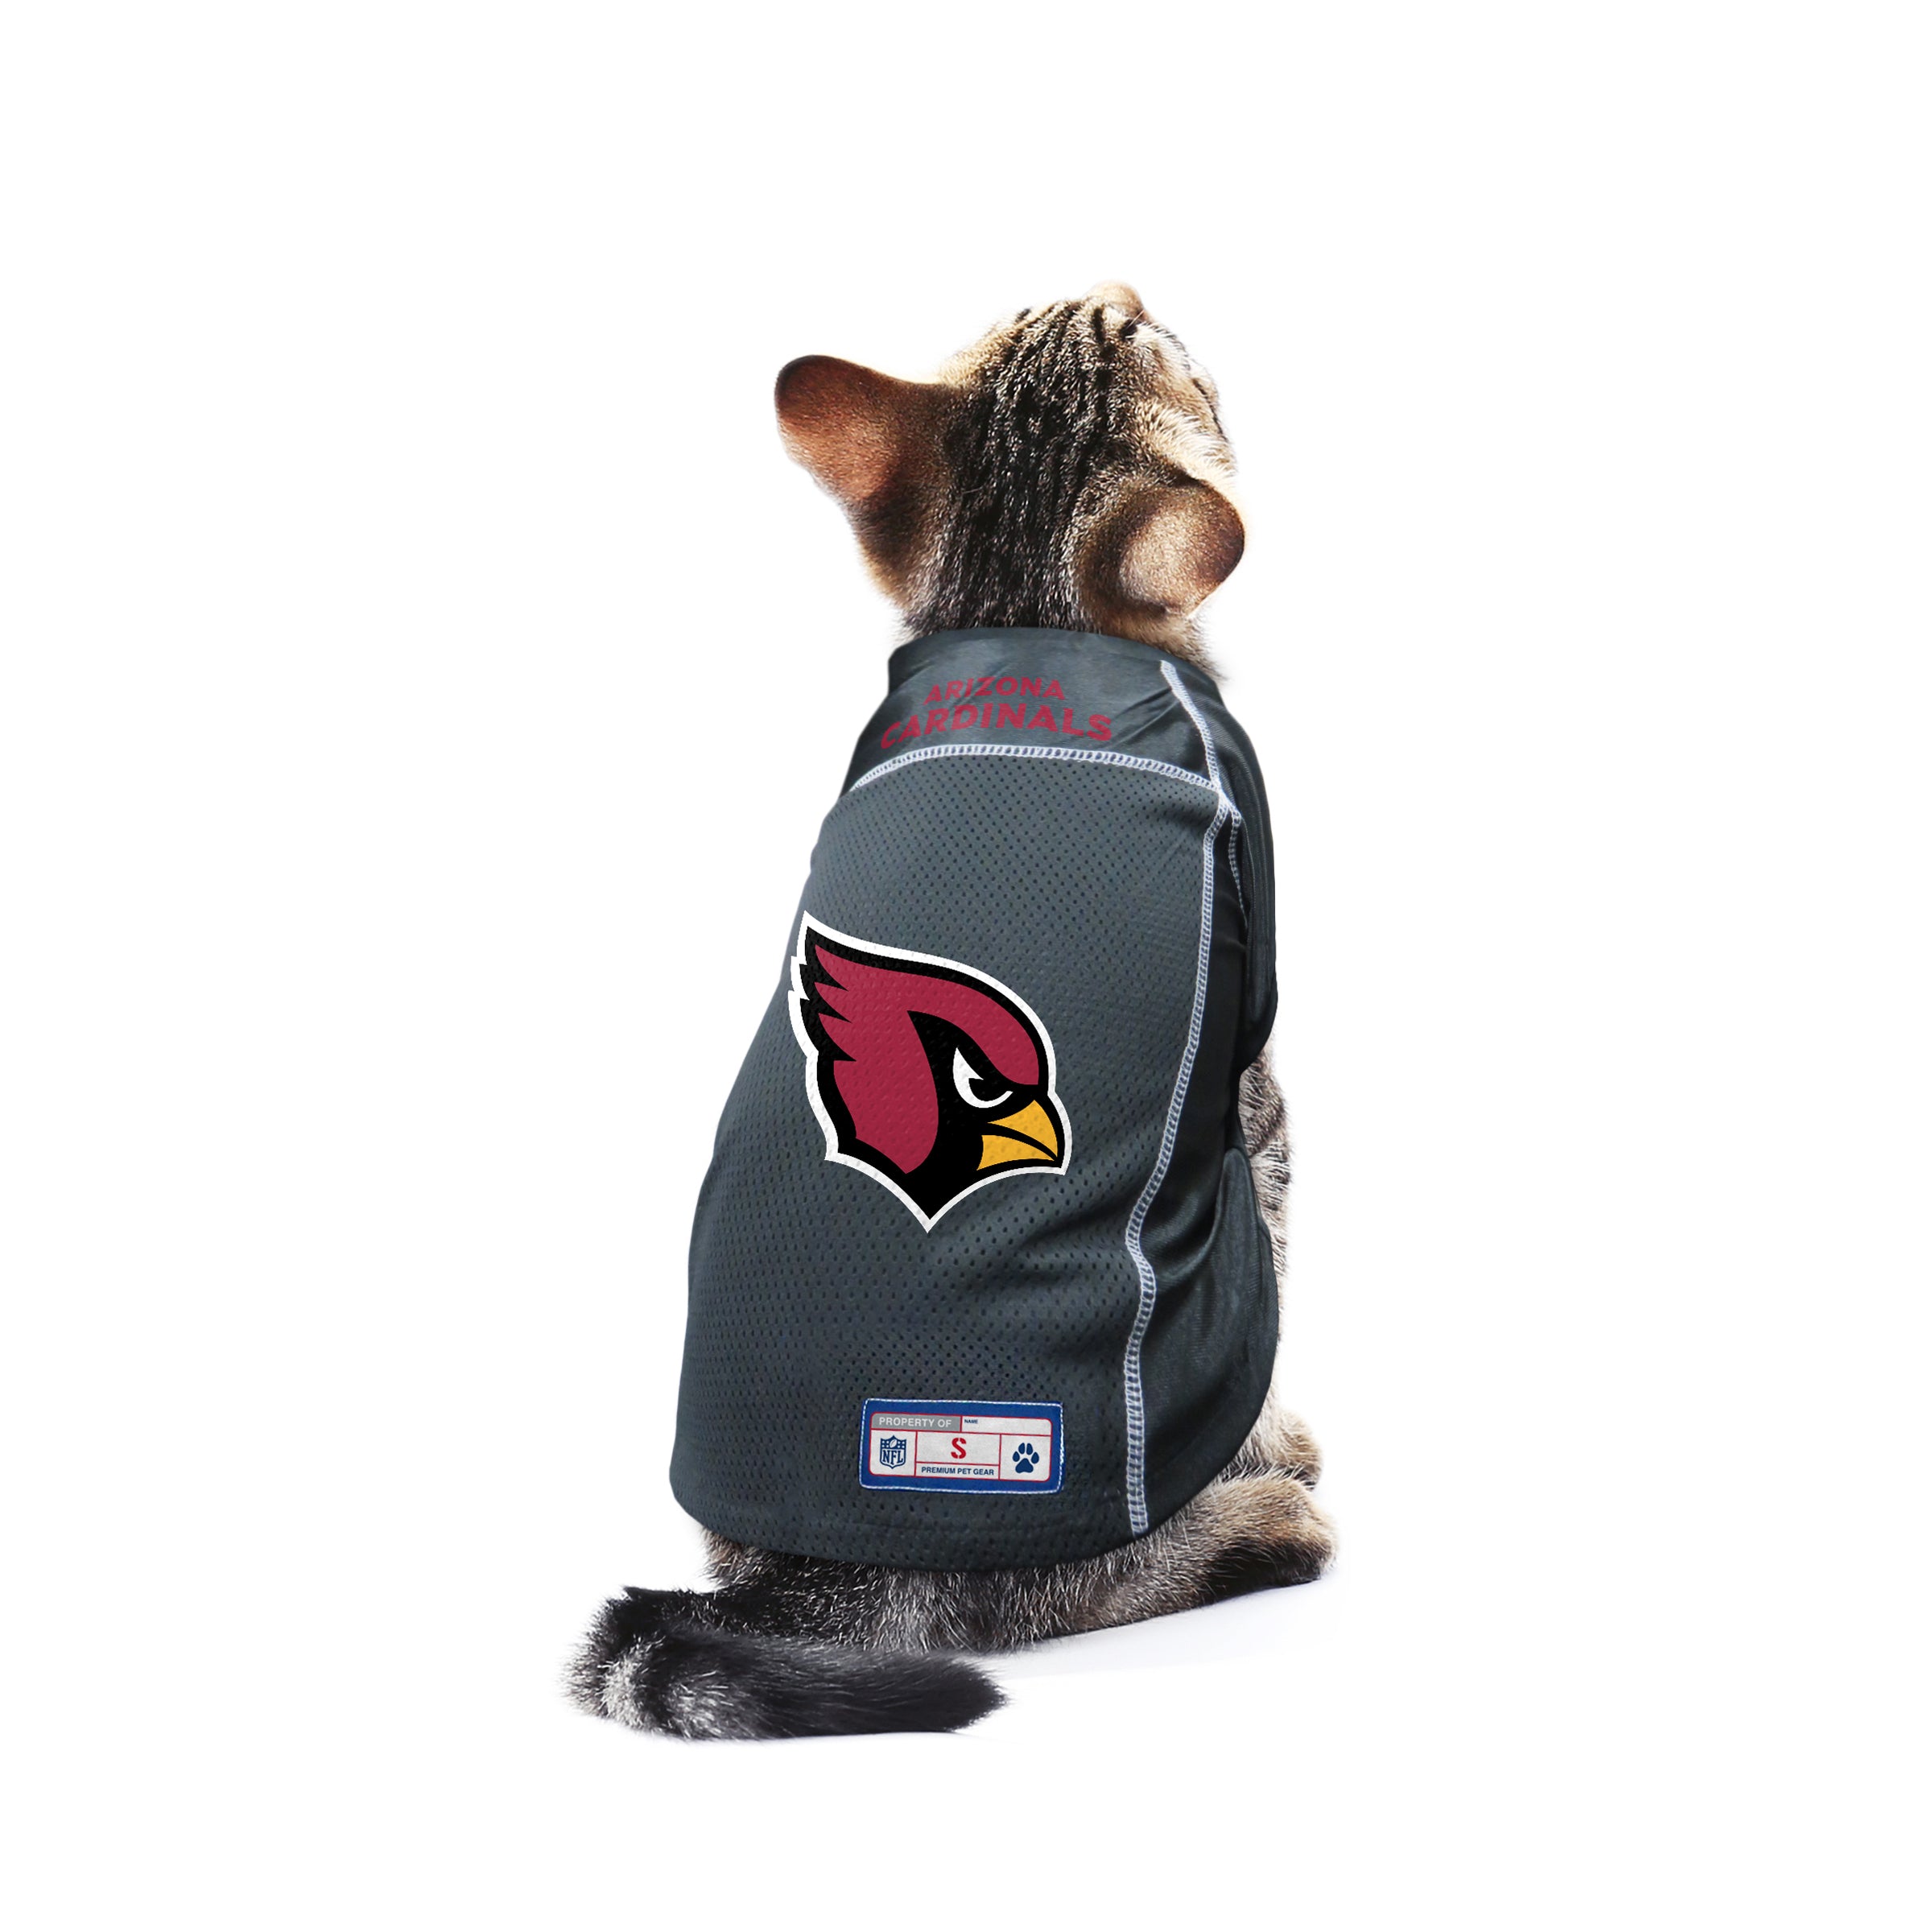  NFL Arizona Cardinals Dog Jersey, Size: X-Large. Best Football  Jersey Costume for Dogs & Cats. Licensed Jersey Shirt. : Sports & Outdoors